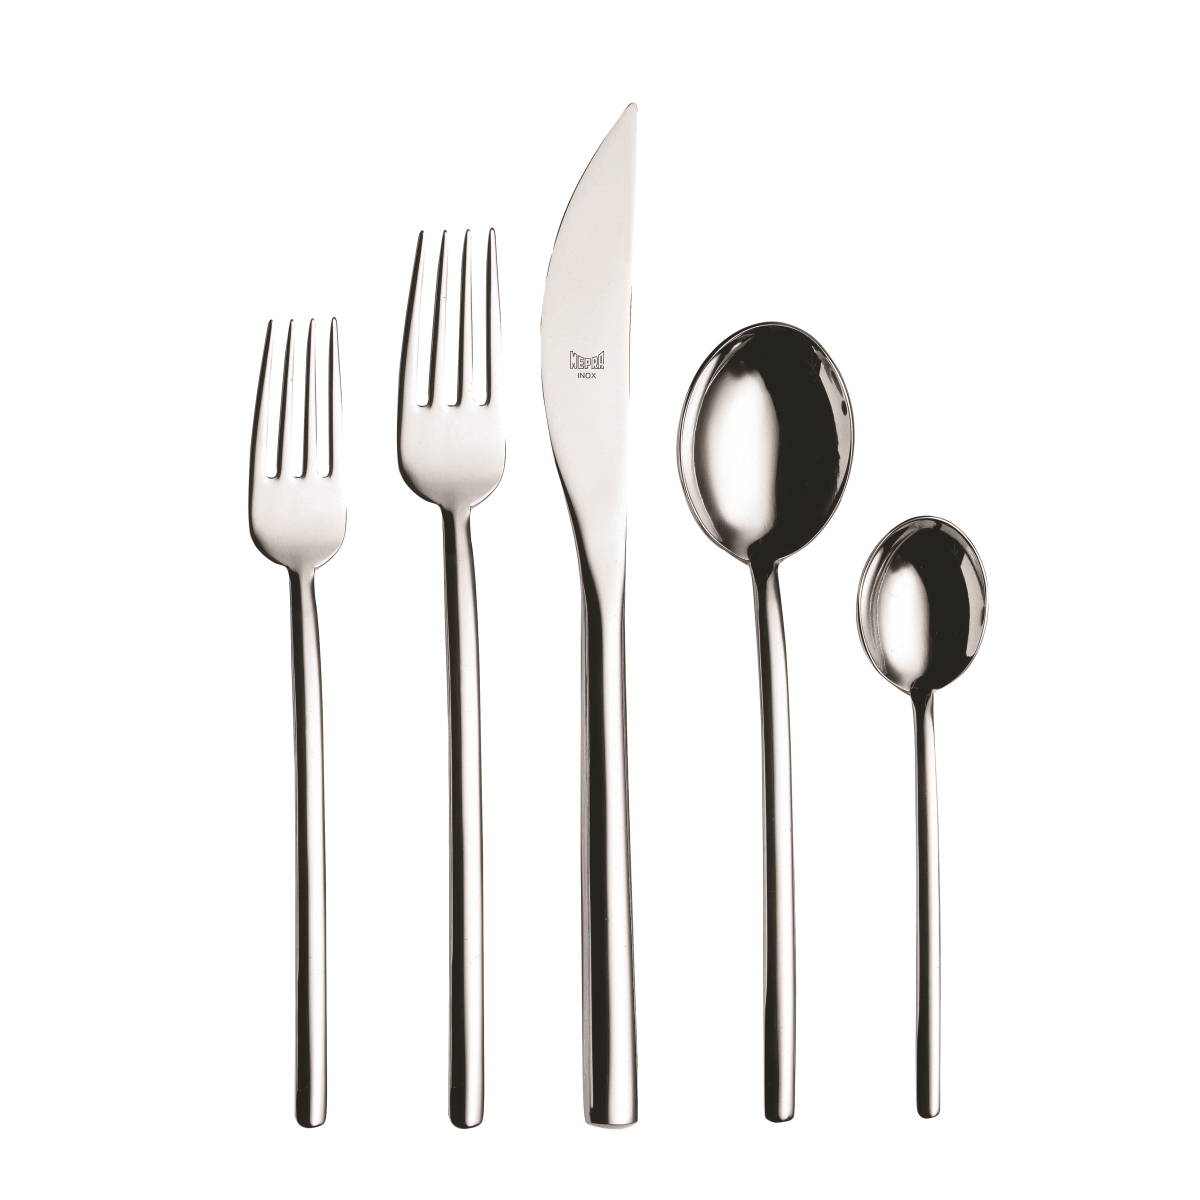 104422020 Stainless Steel Due Cutlery Set - 20 Piece